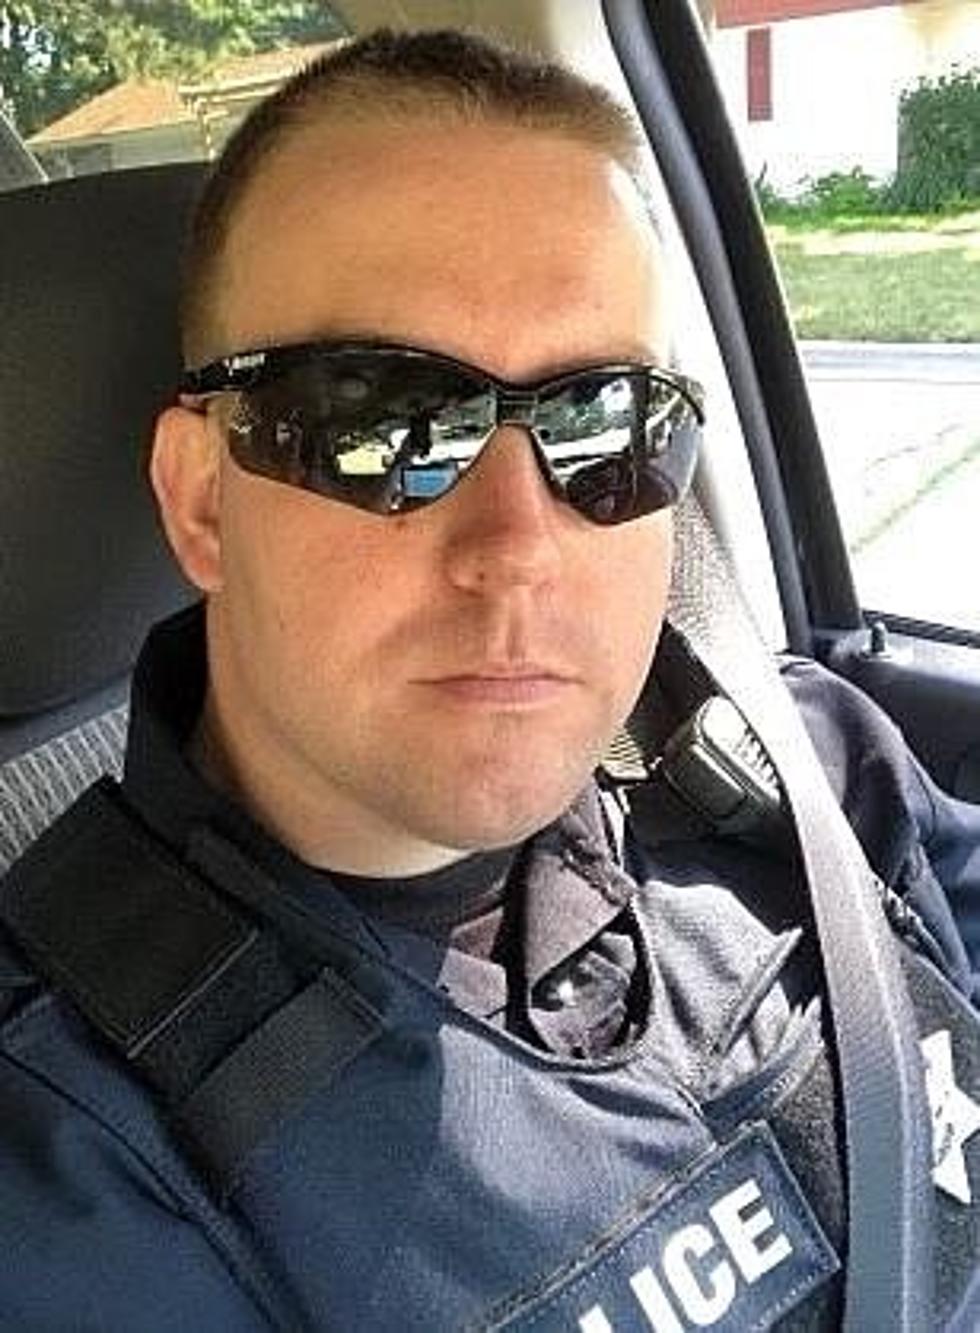 Illinois Police Officer Honored For His Constant Acts of Kindness